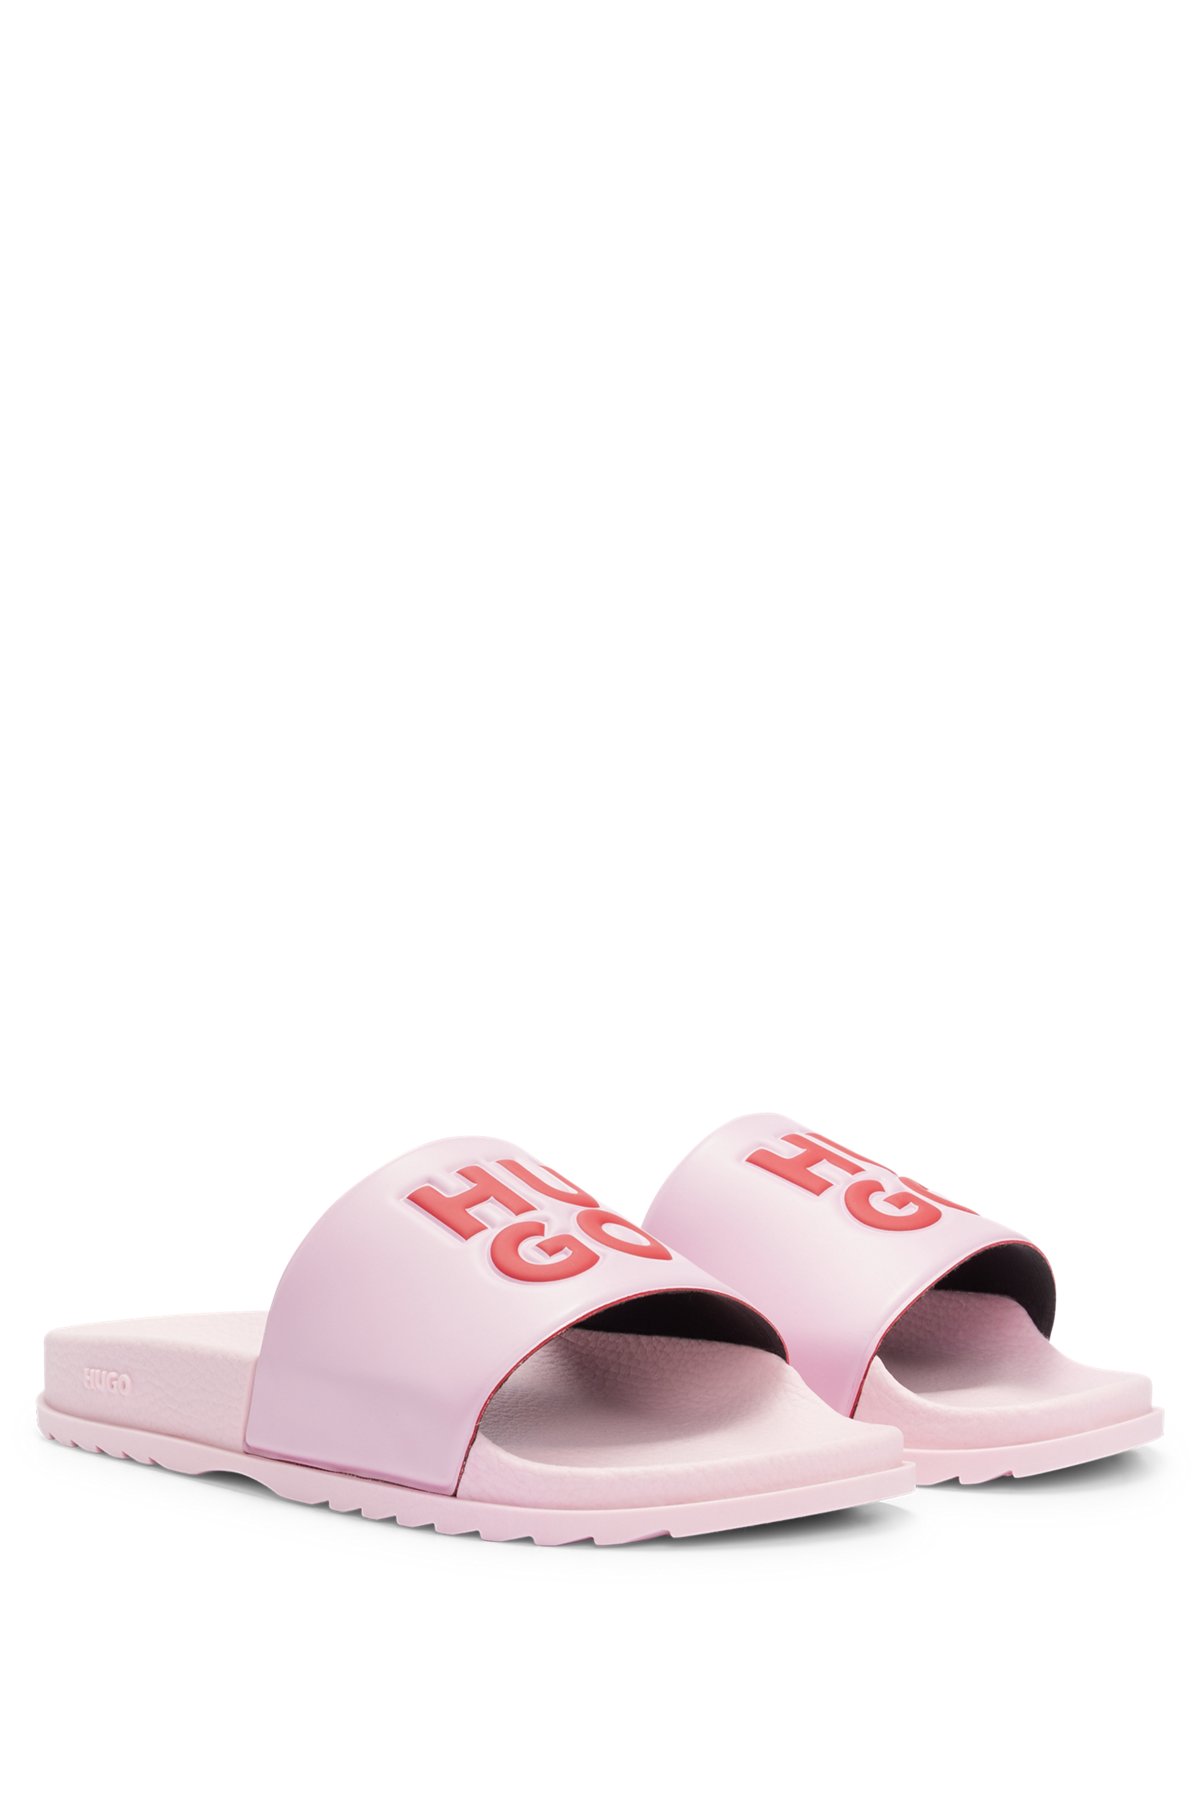 Italian-made slides with stacked logo, light pink